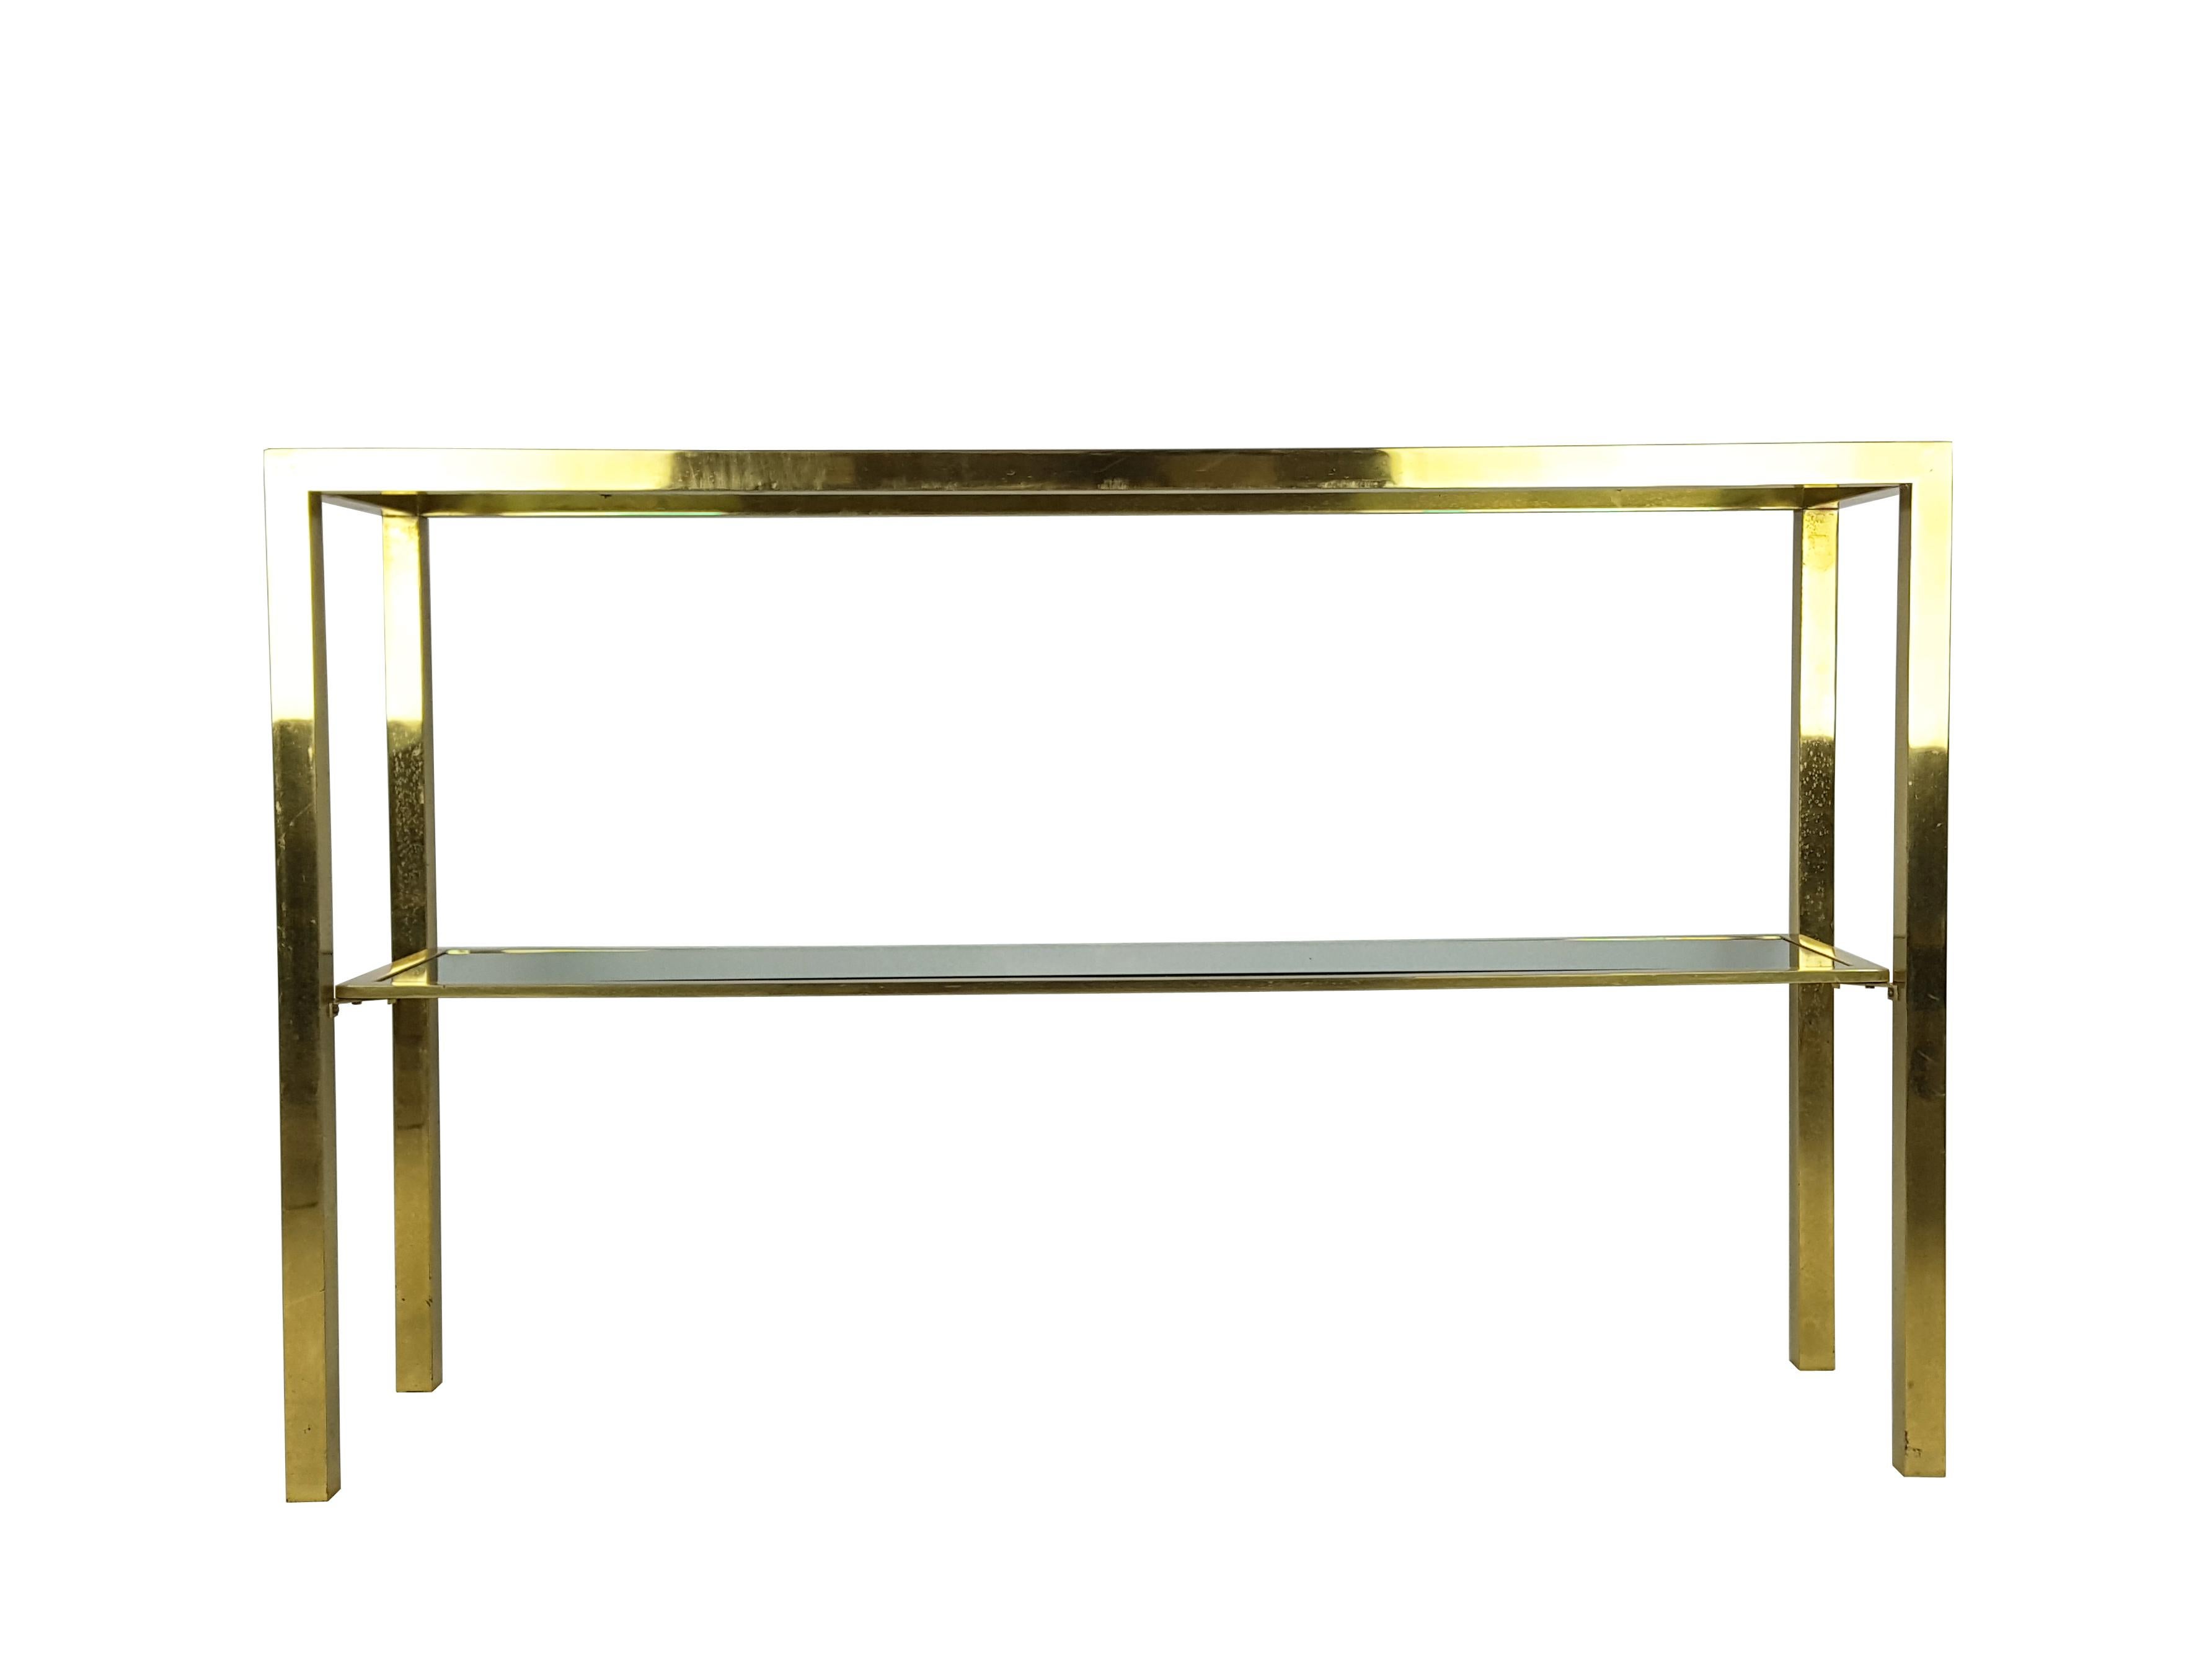 Minimal brass structure with 2 smoked glass shelves. Very good condition: normal oxidation patina.